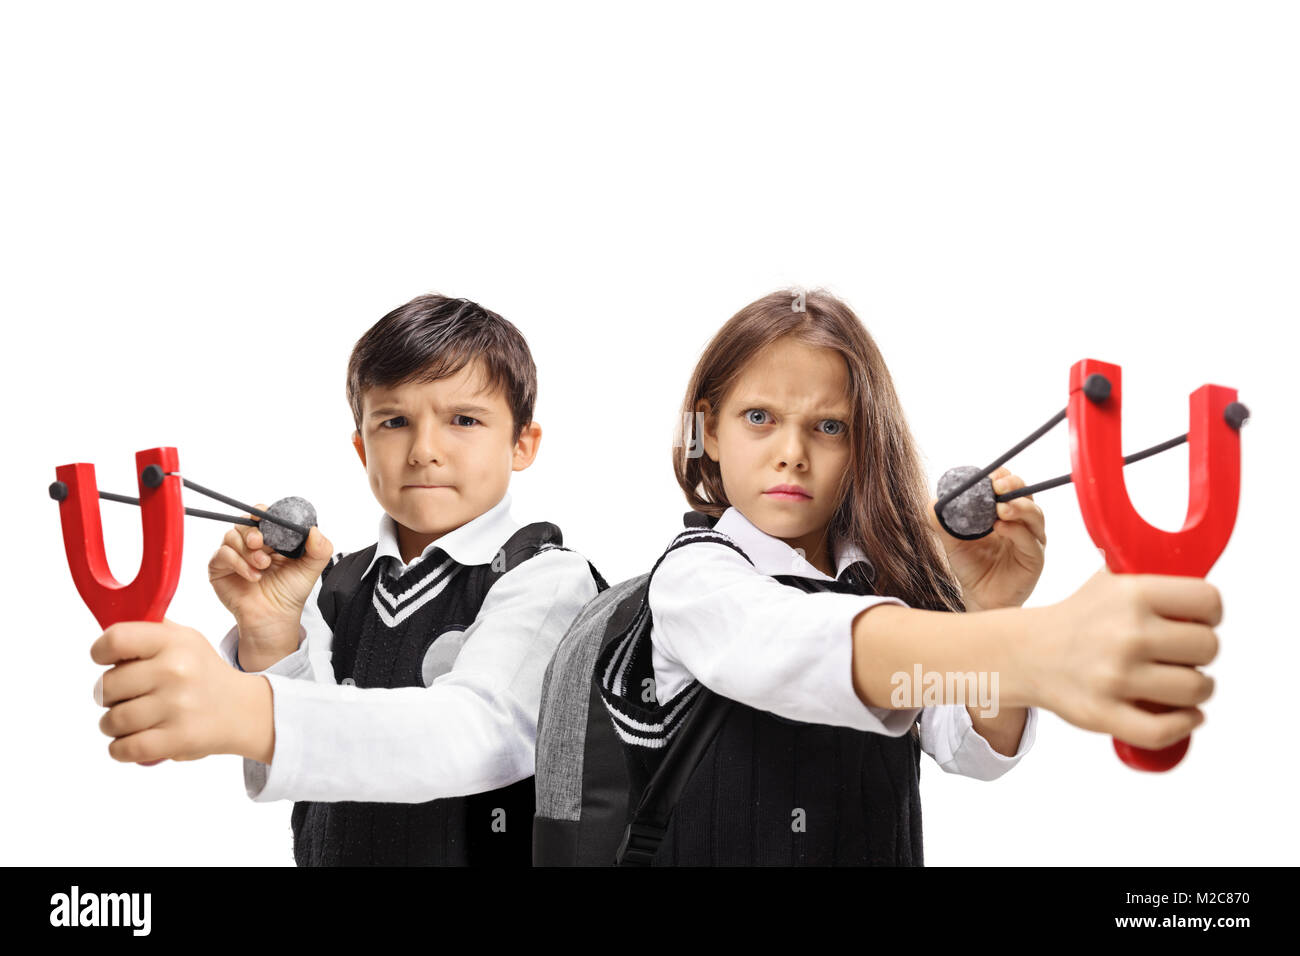 Schoolboy and a schoolgirl aiming with slingshots and rocks isolated on white background Stock Photo